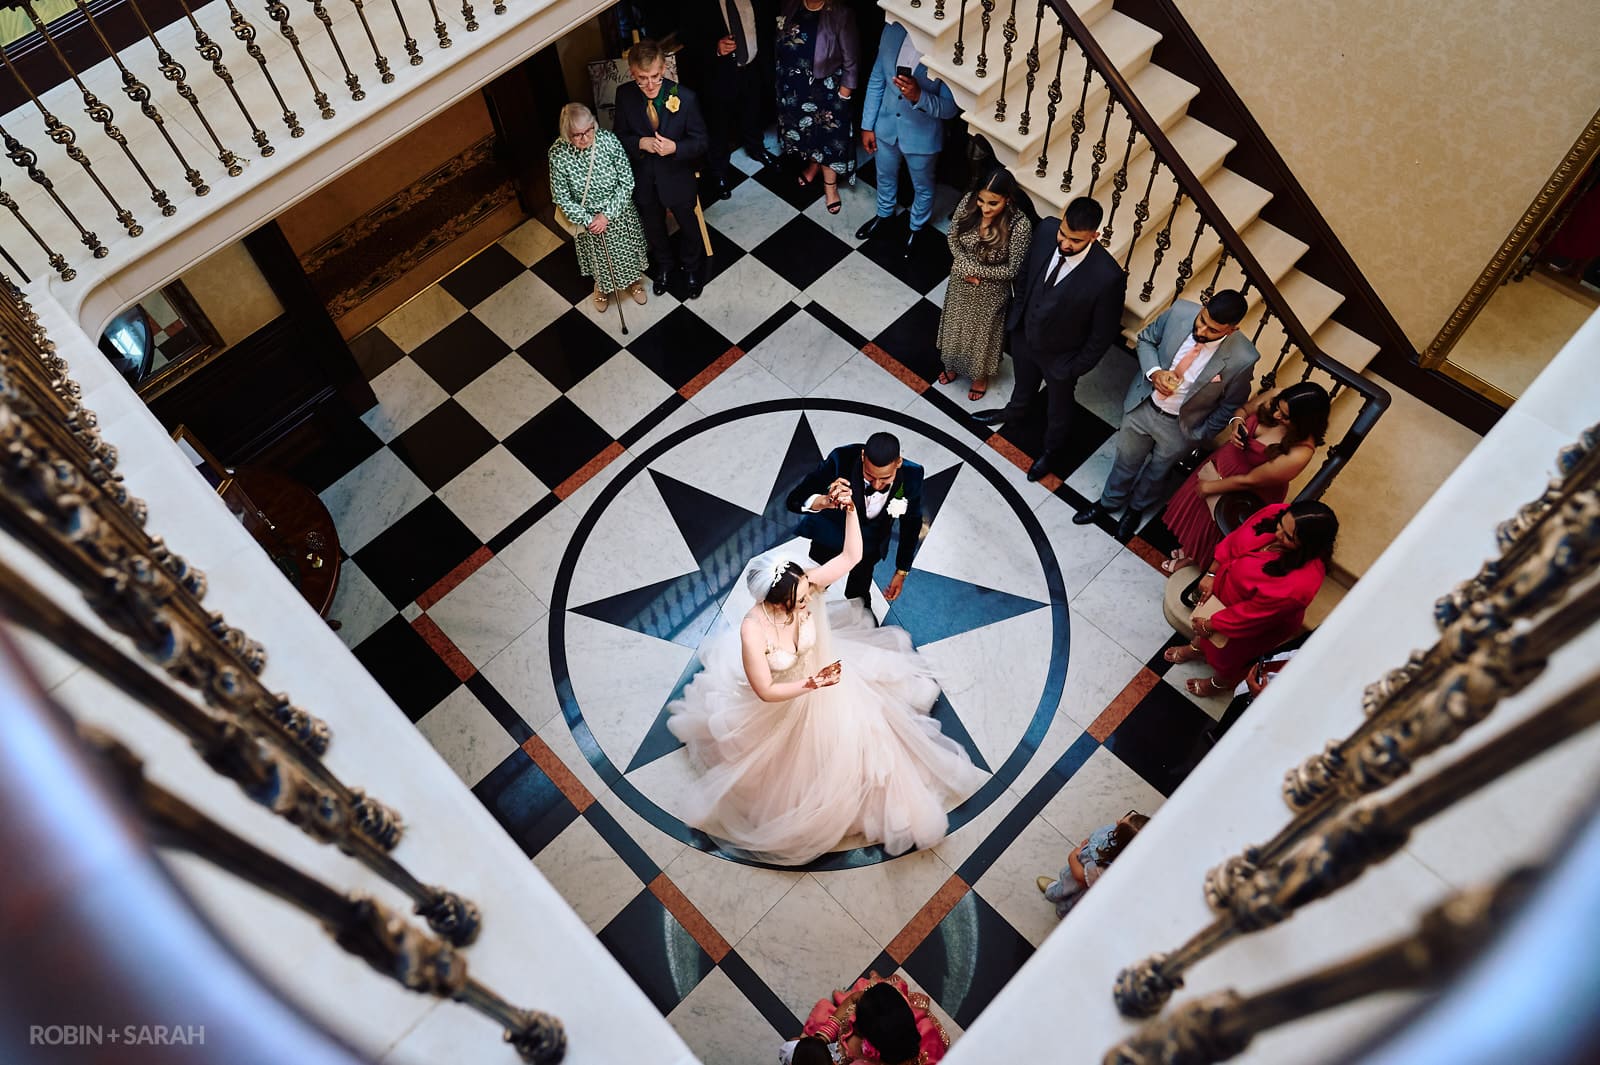 Bride and groom perform their first dance on marble floor at Spring Grove House